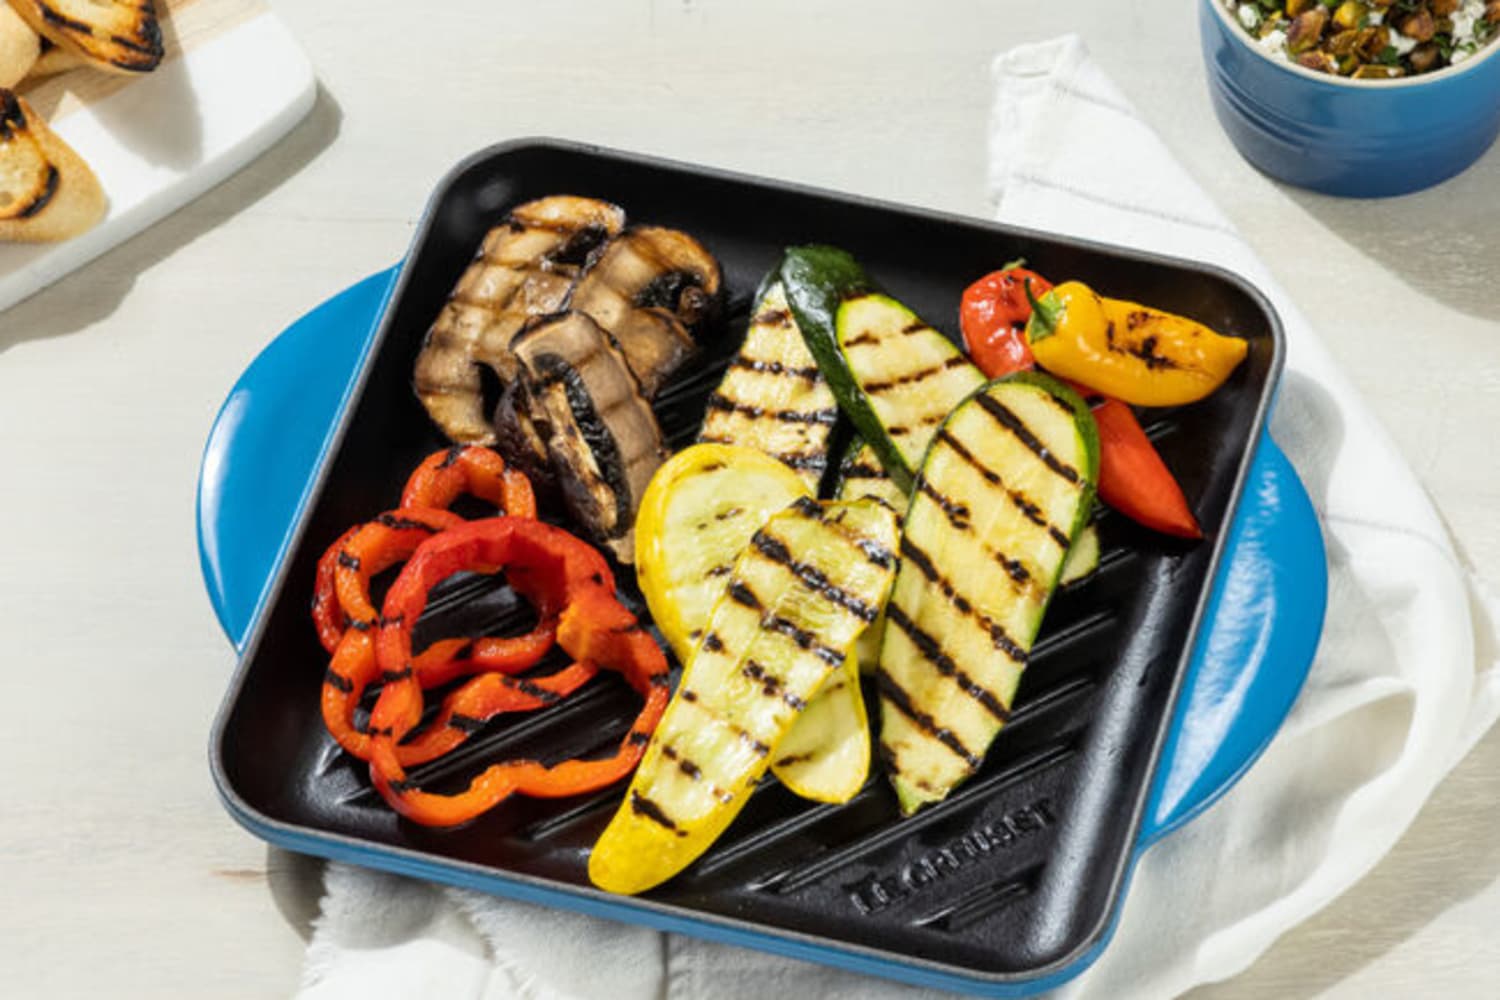 Labor Day sale: Get this Le Creuset skinny grill pan for $100 off